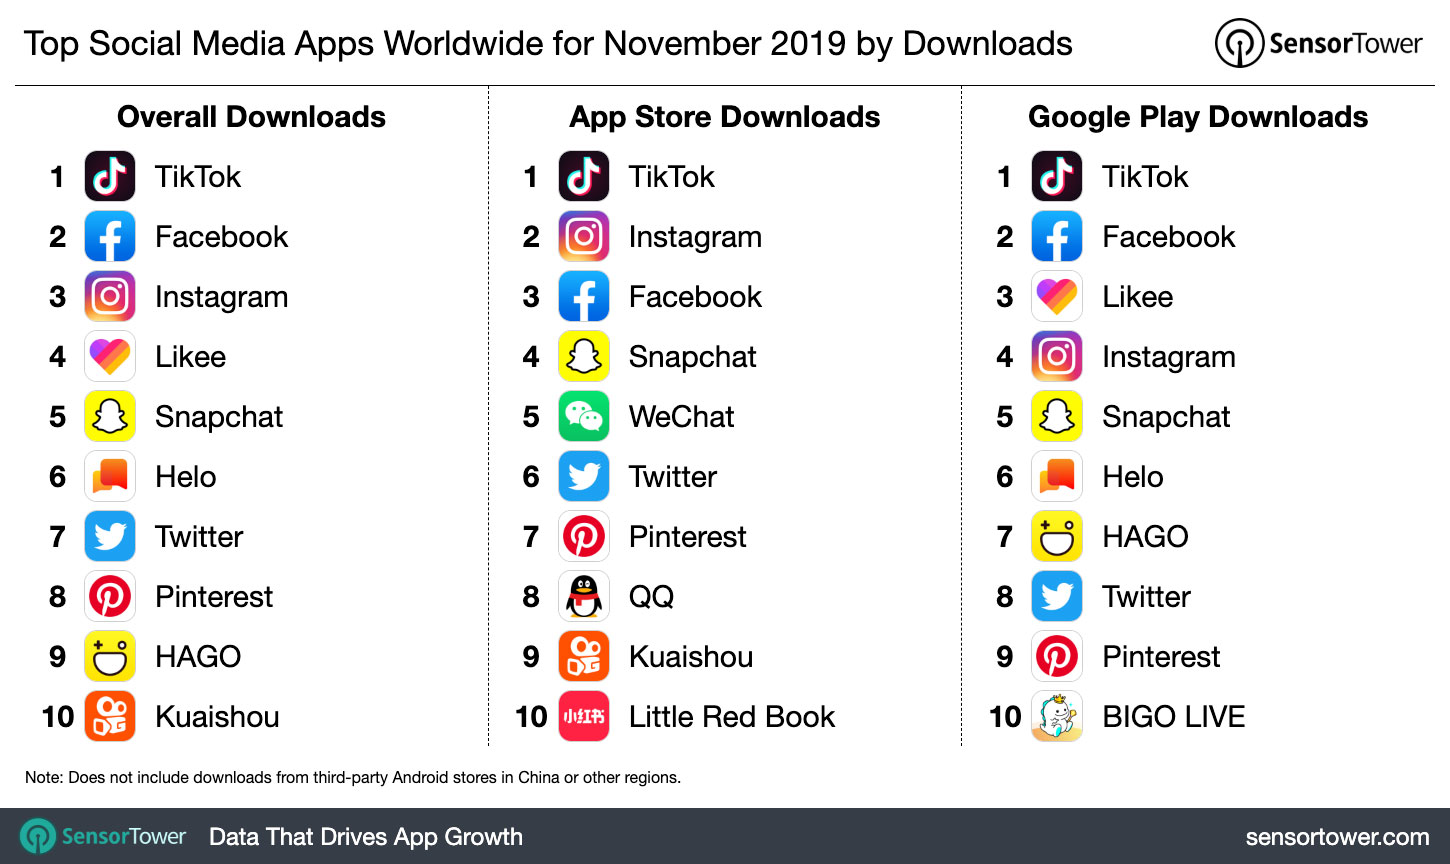 Top Social Media Apps Worldwide for November 2019 by Downloads